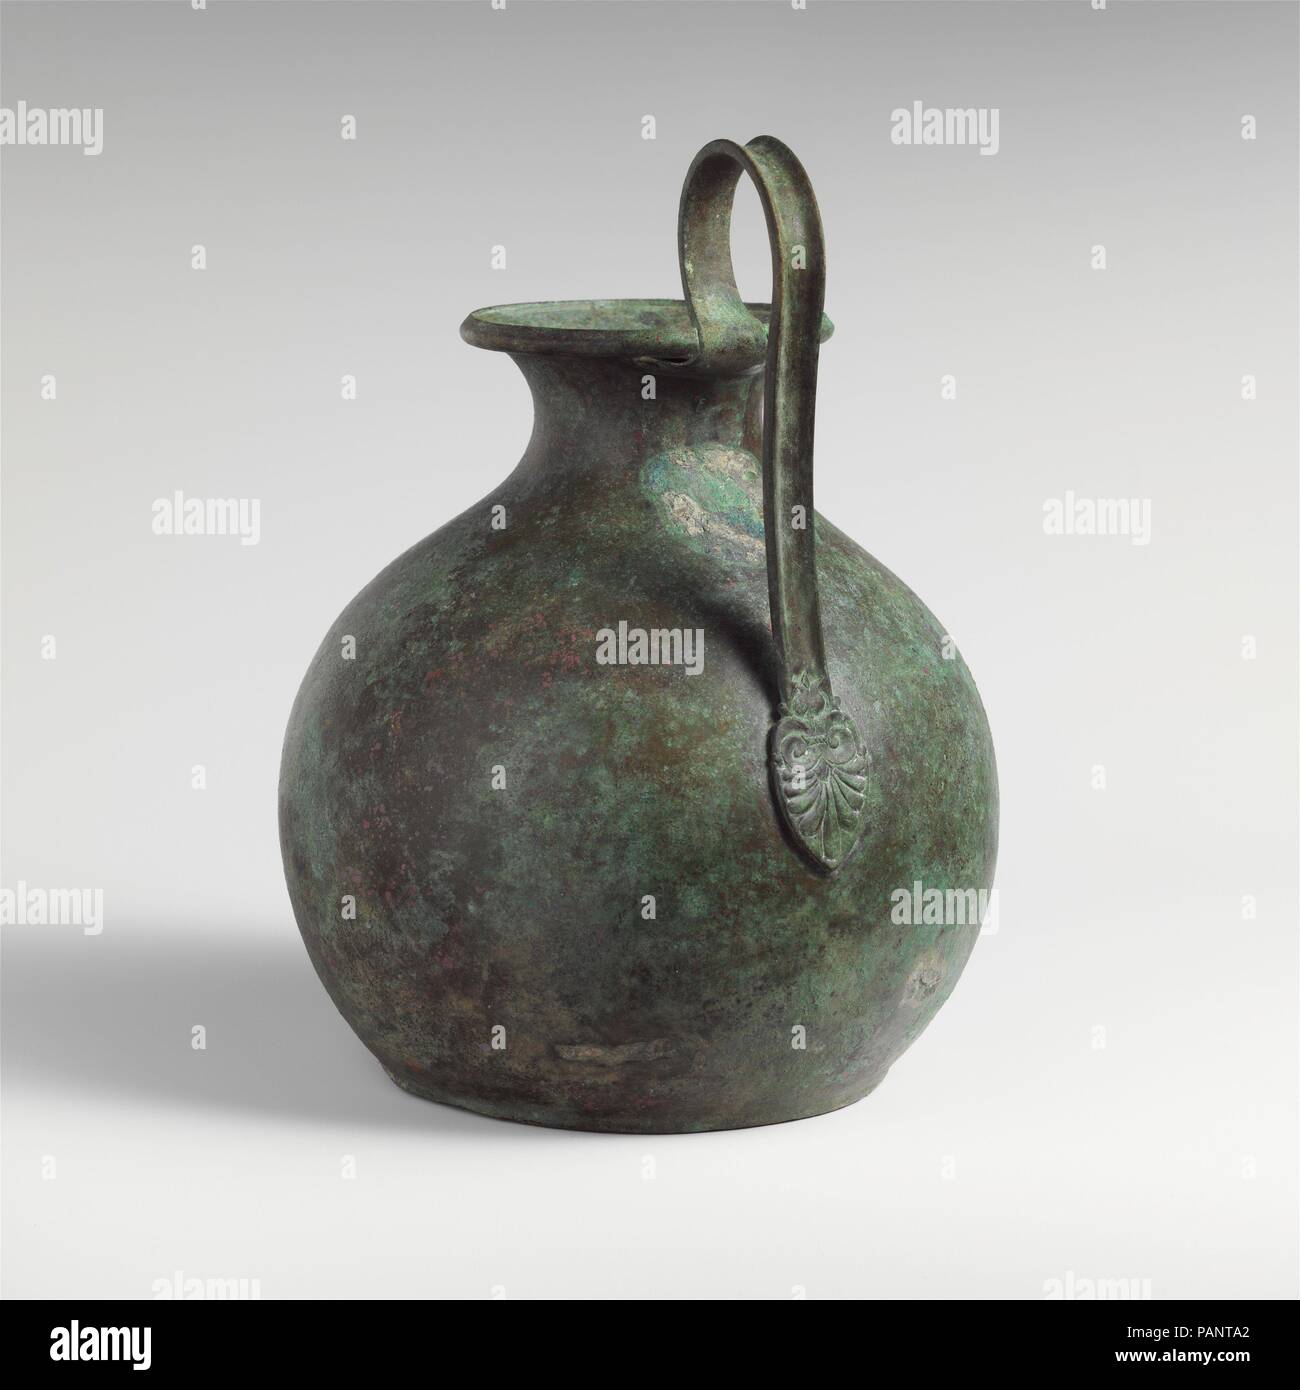 Bronze oinochoe (jug). Culture: East Greek. Dimensions: H. x width  9 1/16 x 5 in. (23 x 12.7 cm)  diameter  7 in. (17.8 cm). Date: late 6th century B.C..  Handle is worked separately; it may be an ancient replacement. Museum: Metropolitan Museum of Art, New York, USA. Stock Photo